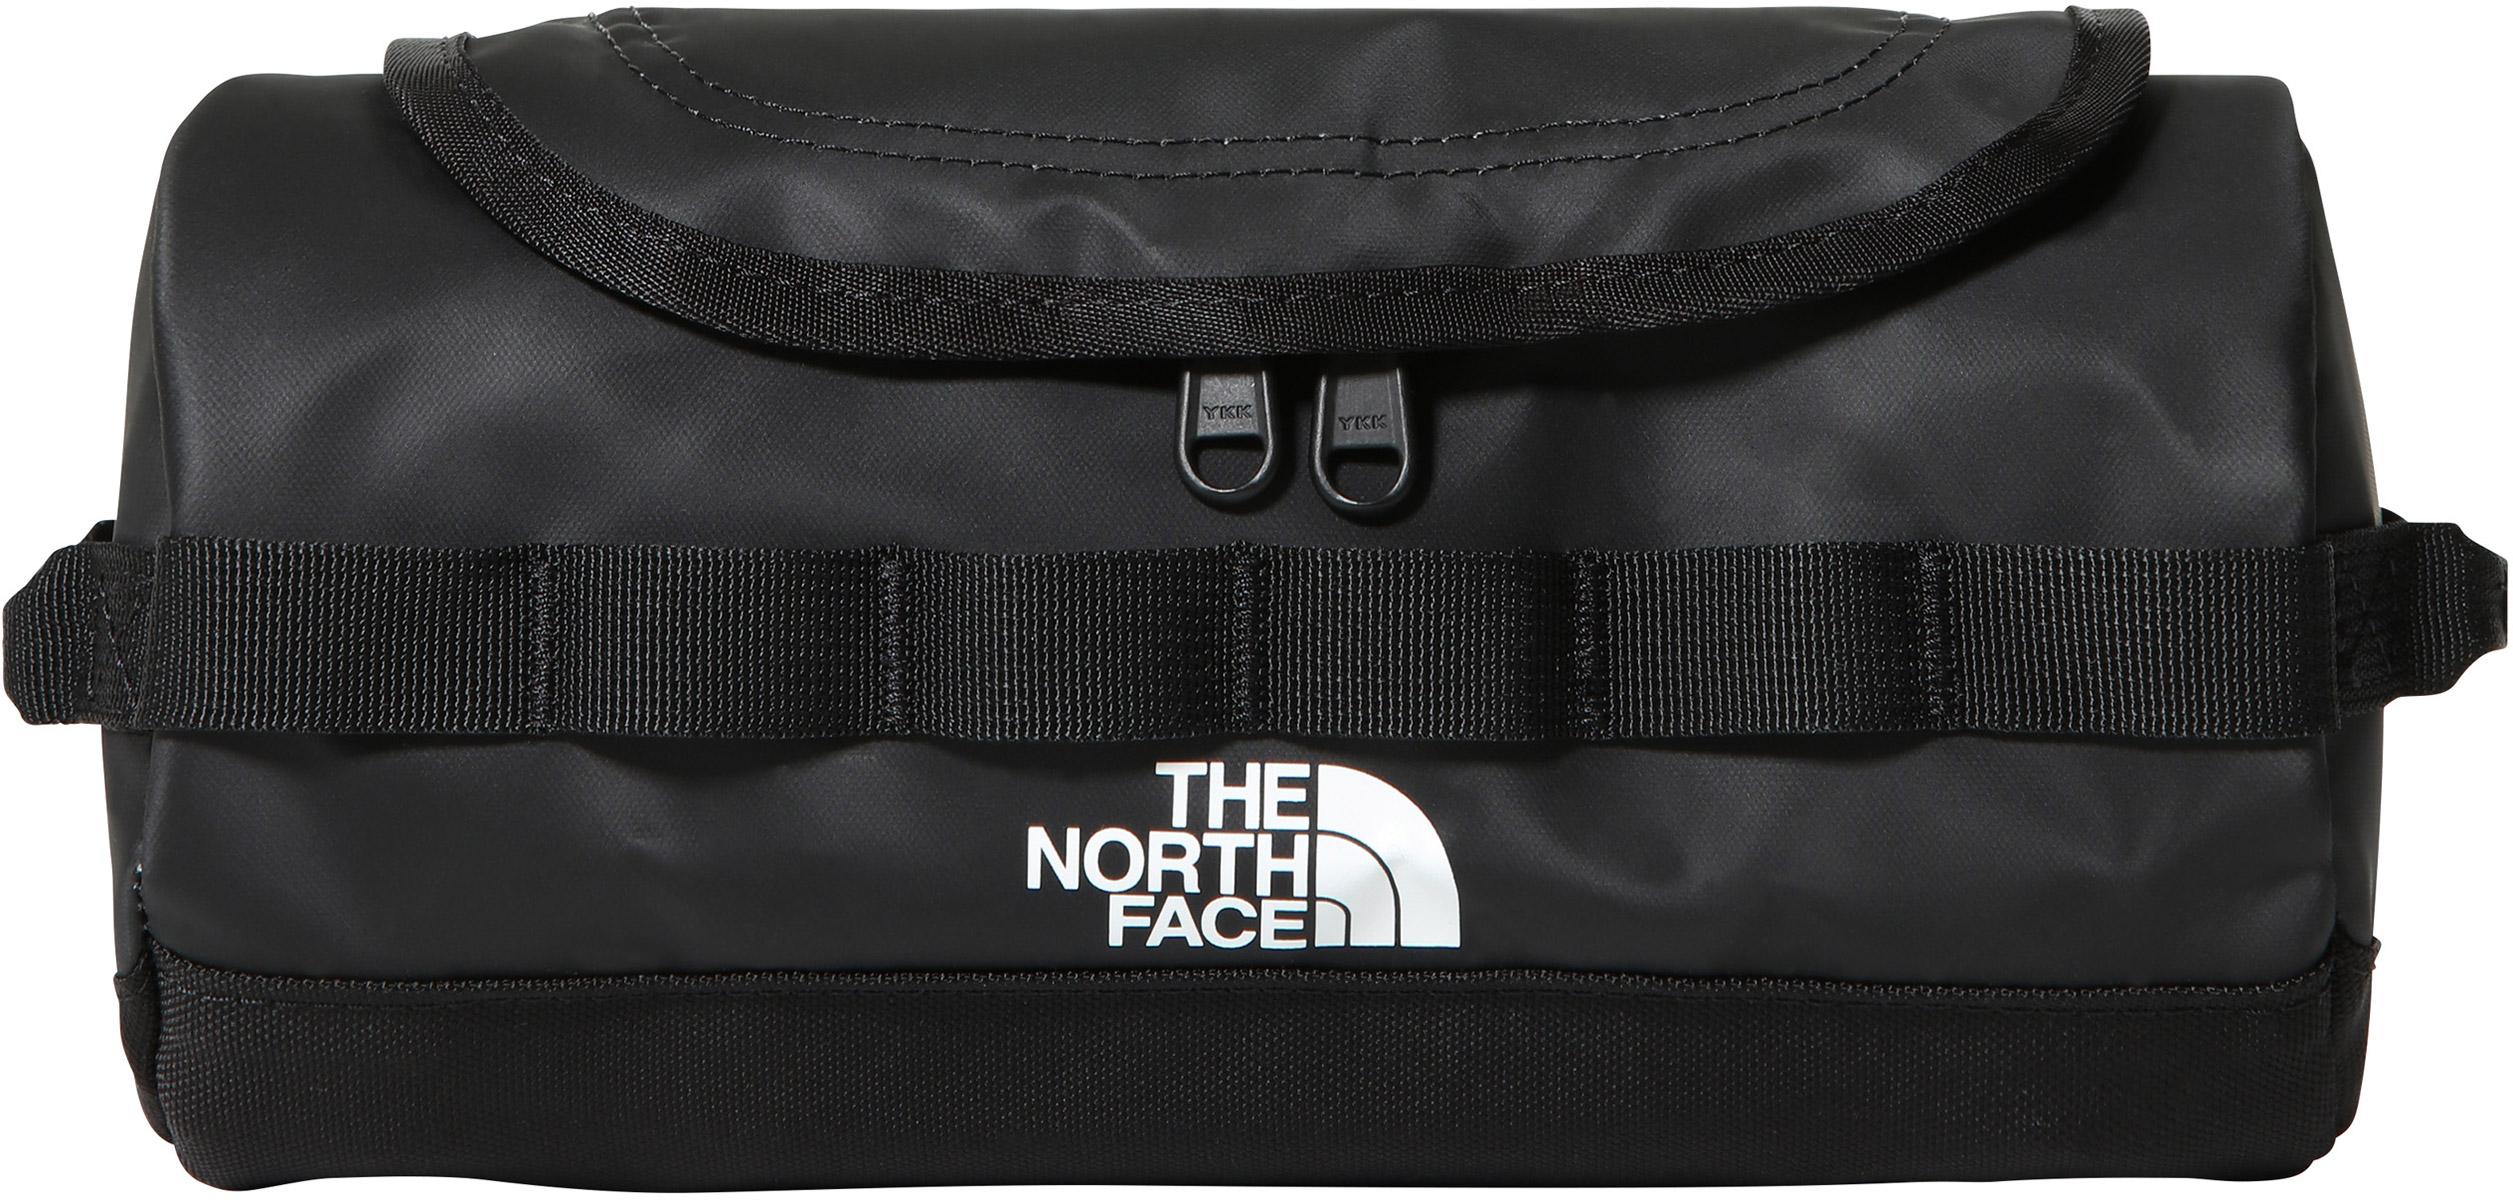 The North Face Travel Canister - Small - Tnf Black/tnf White